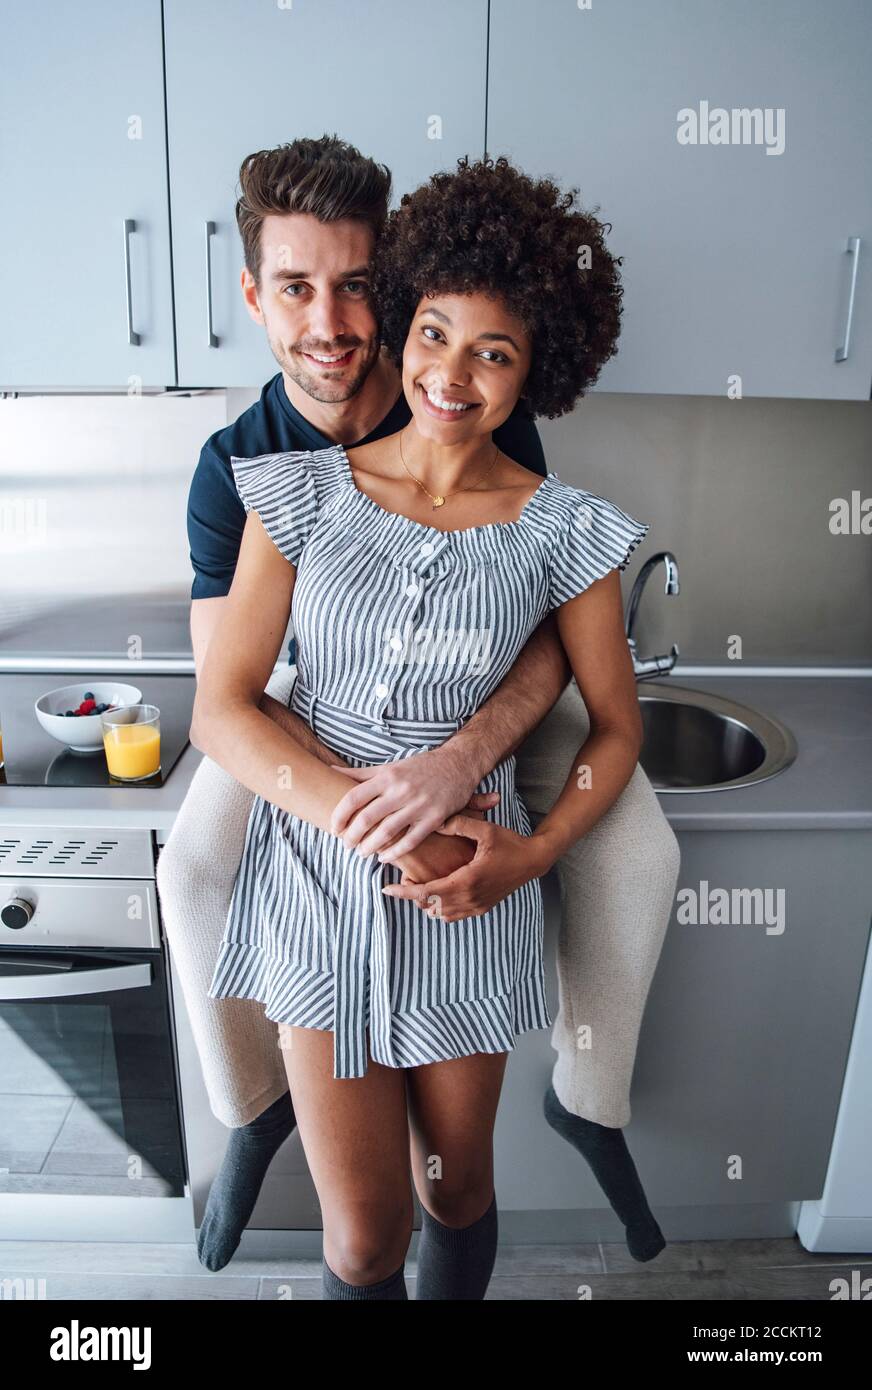 Romantic multi-ethnic couple embracing in kitchen of penthouse Stock Photo